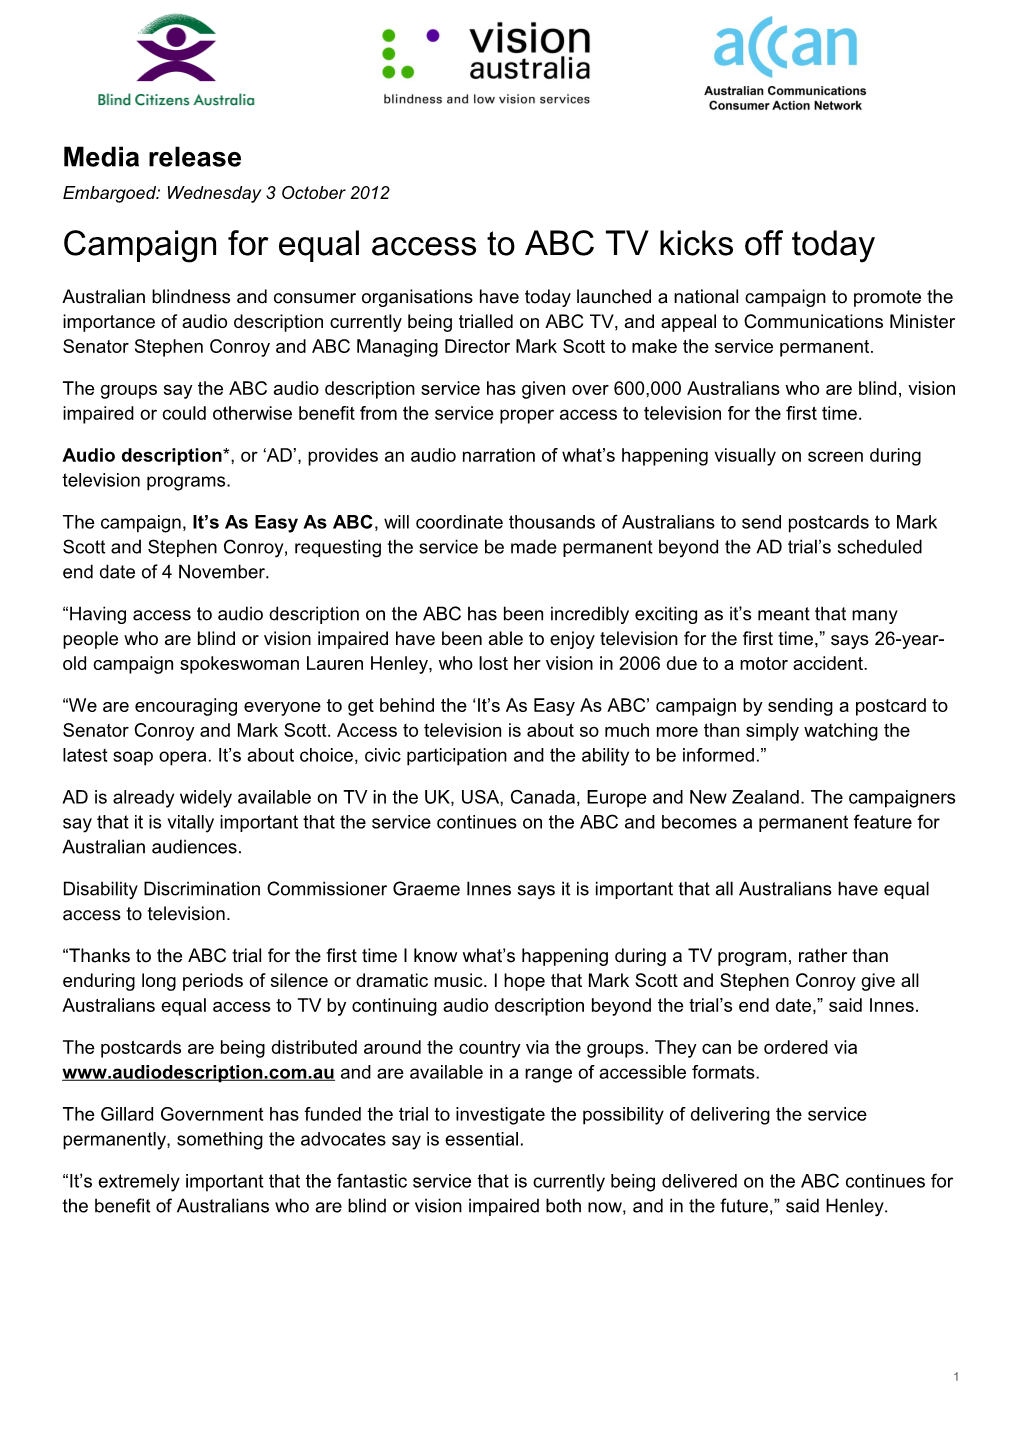 Campaign for Equal Access to ABC TV Kicks Off Today